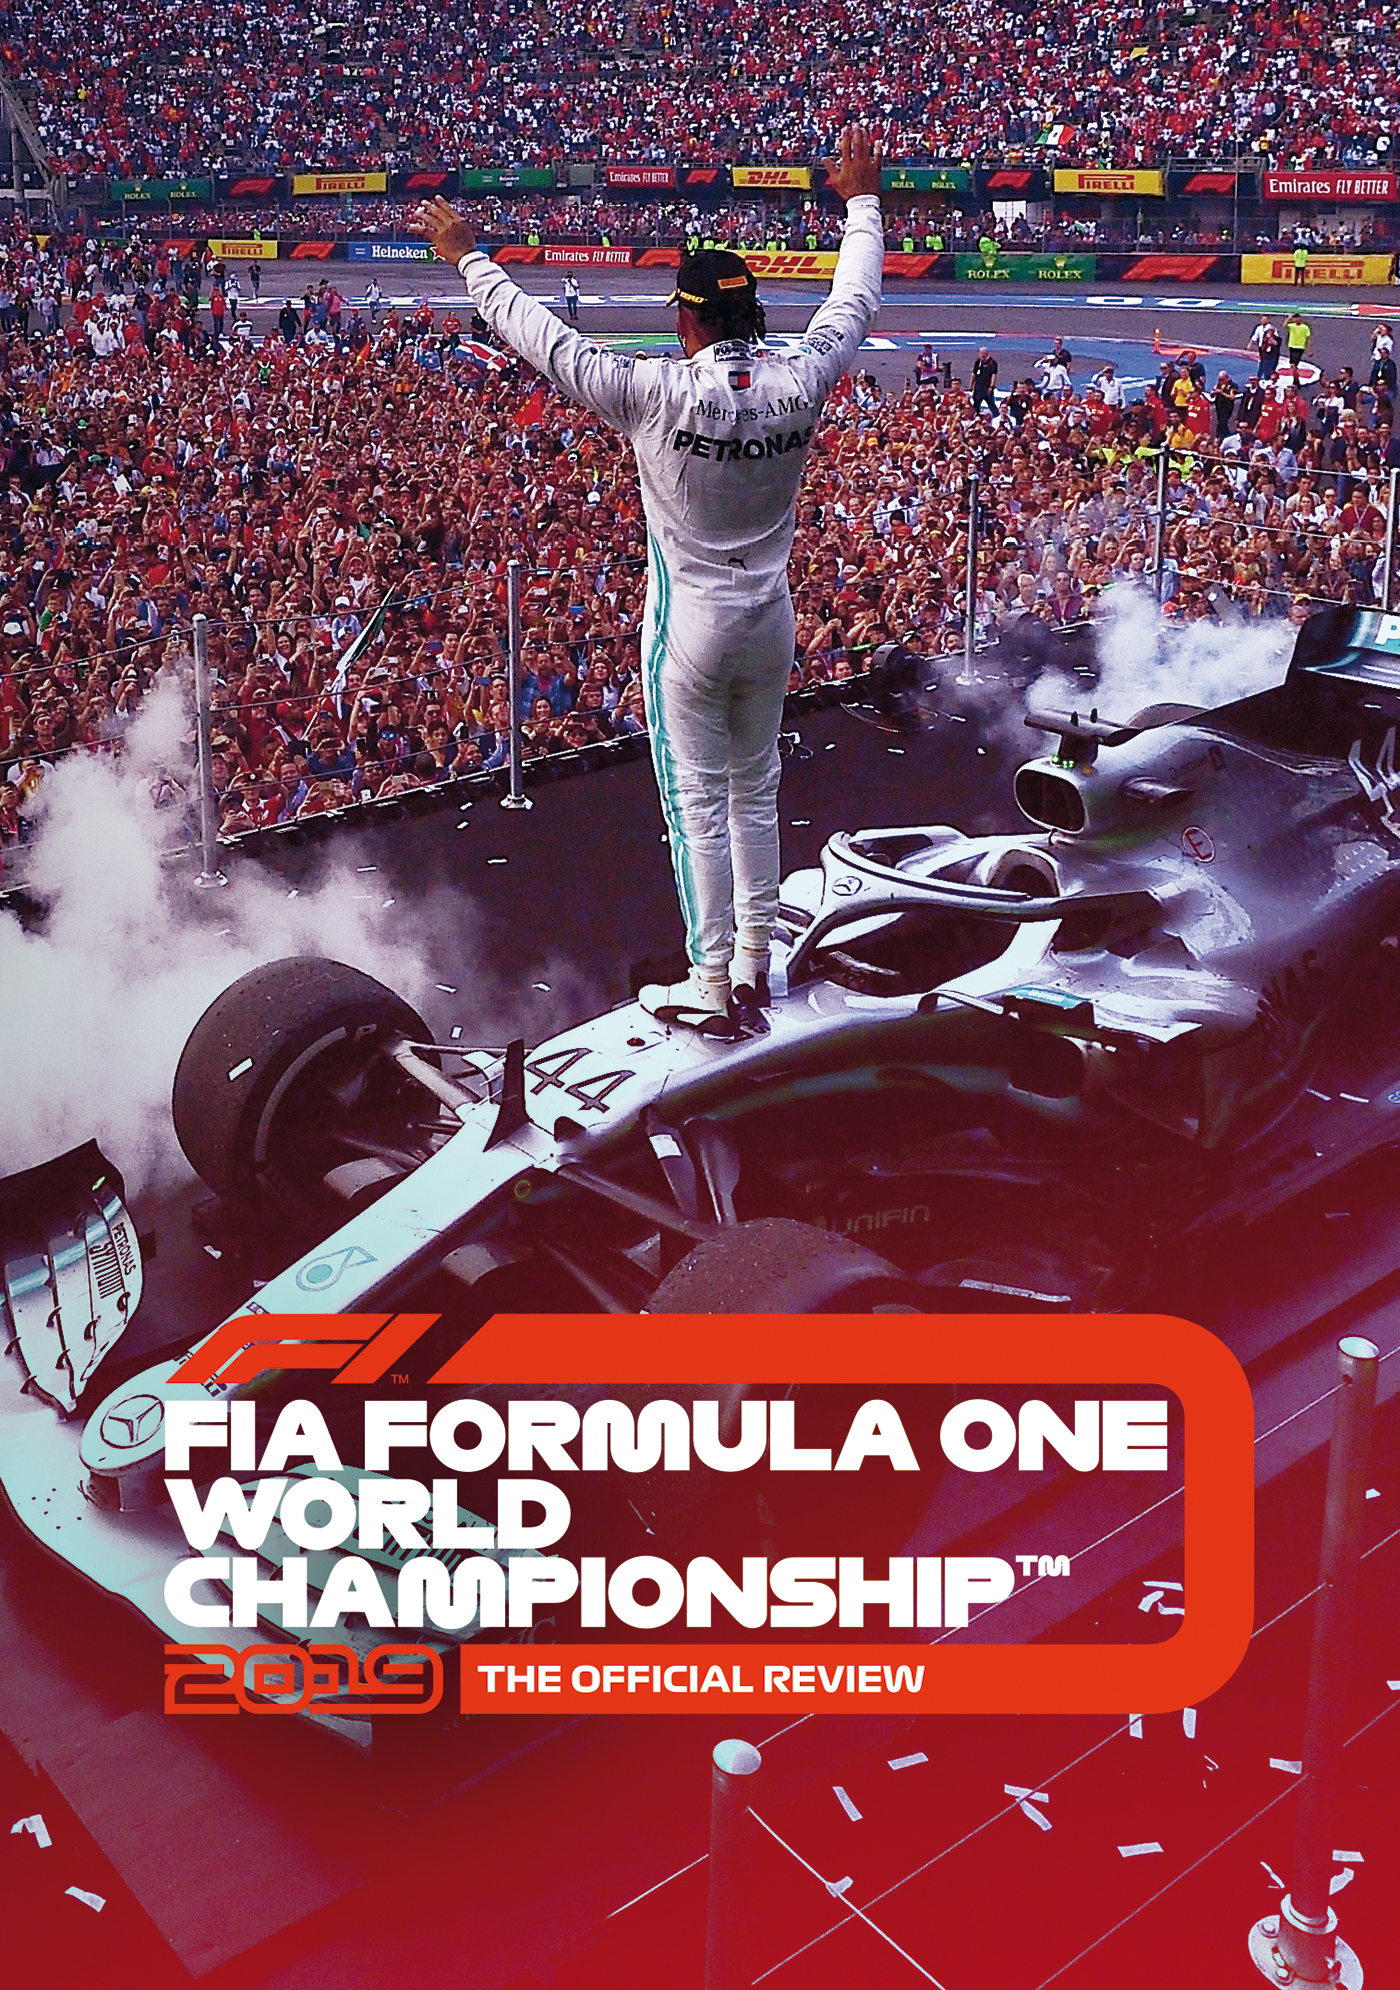 The Official Review of the 2019 FIA Formula One World Championship